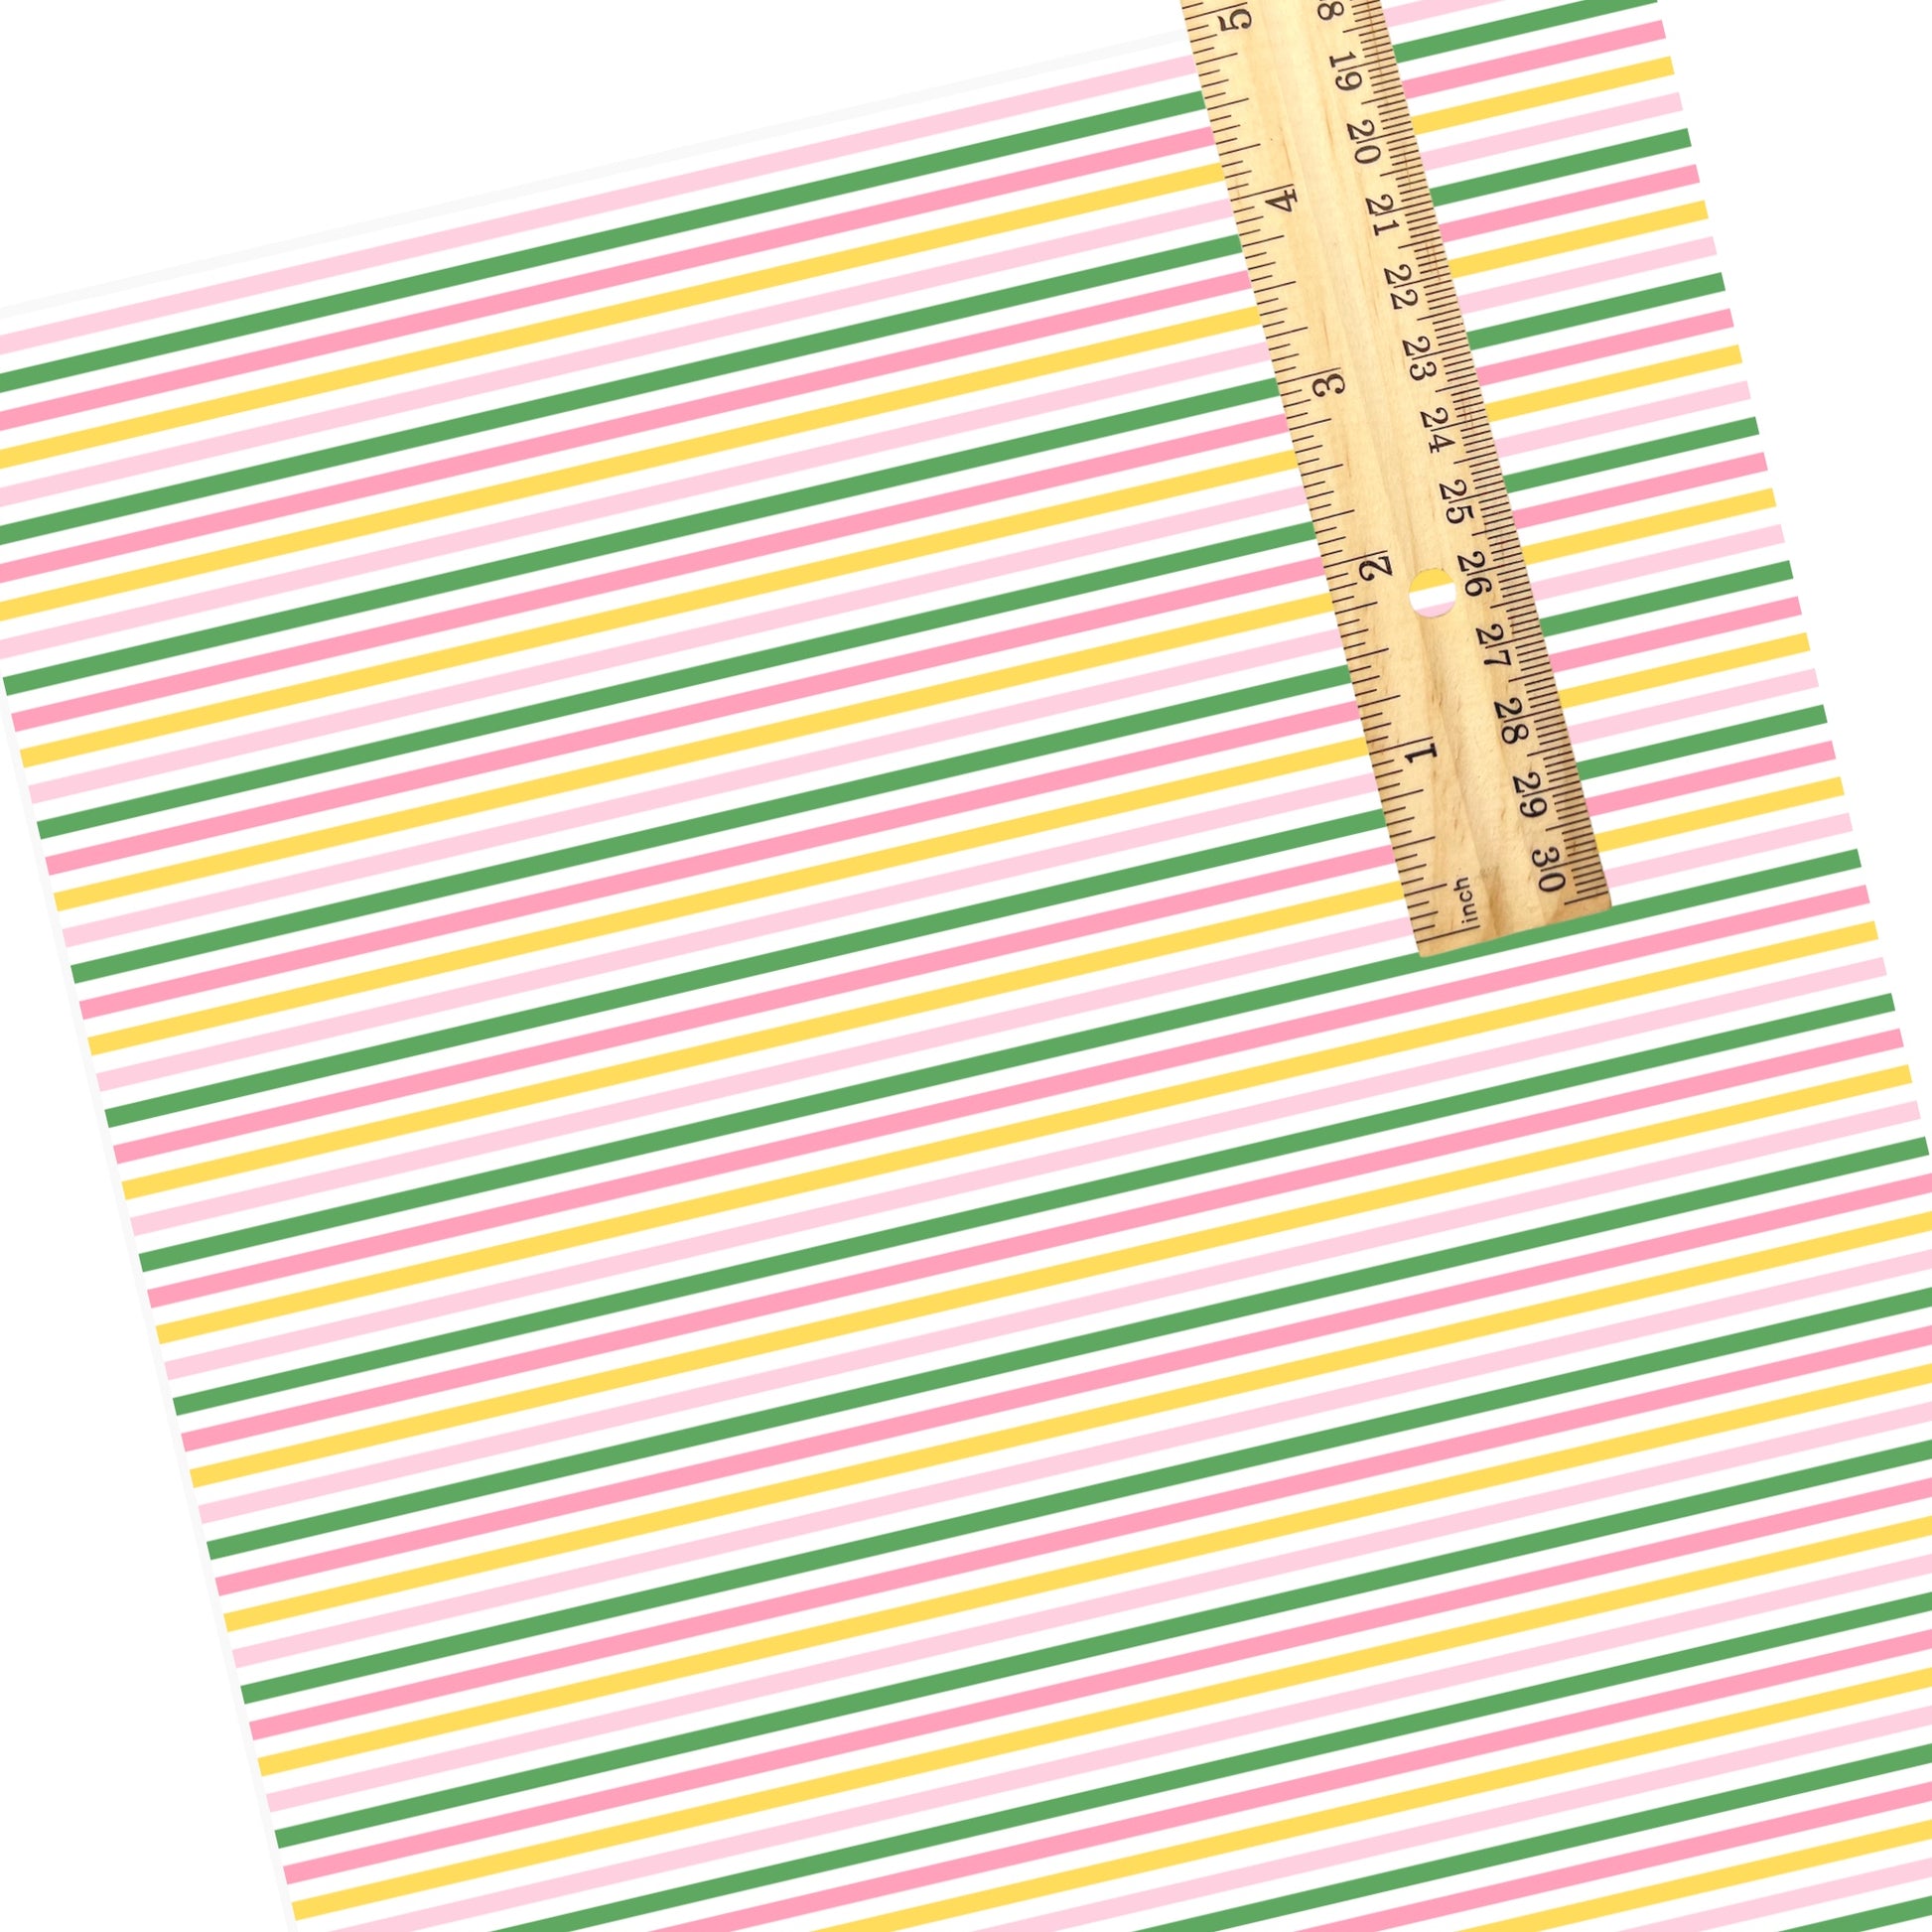 These summer faux leather sheets contain the following design elements: pink, yellow, white, and green stripe pattern. Our CPSIA compliant faux leather sheets or rolls can be used for all types of crafting projects.